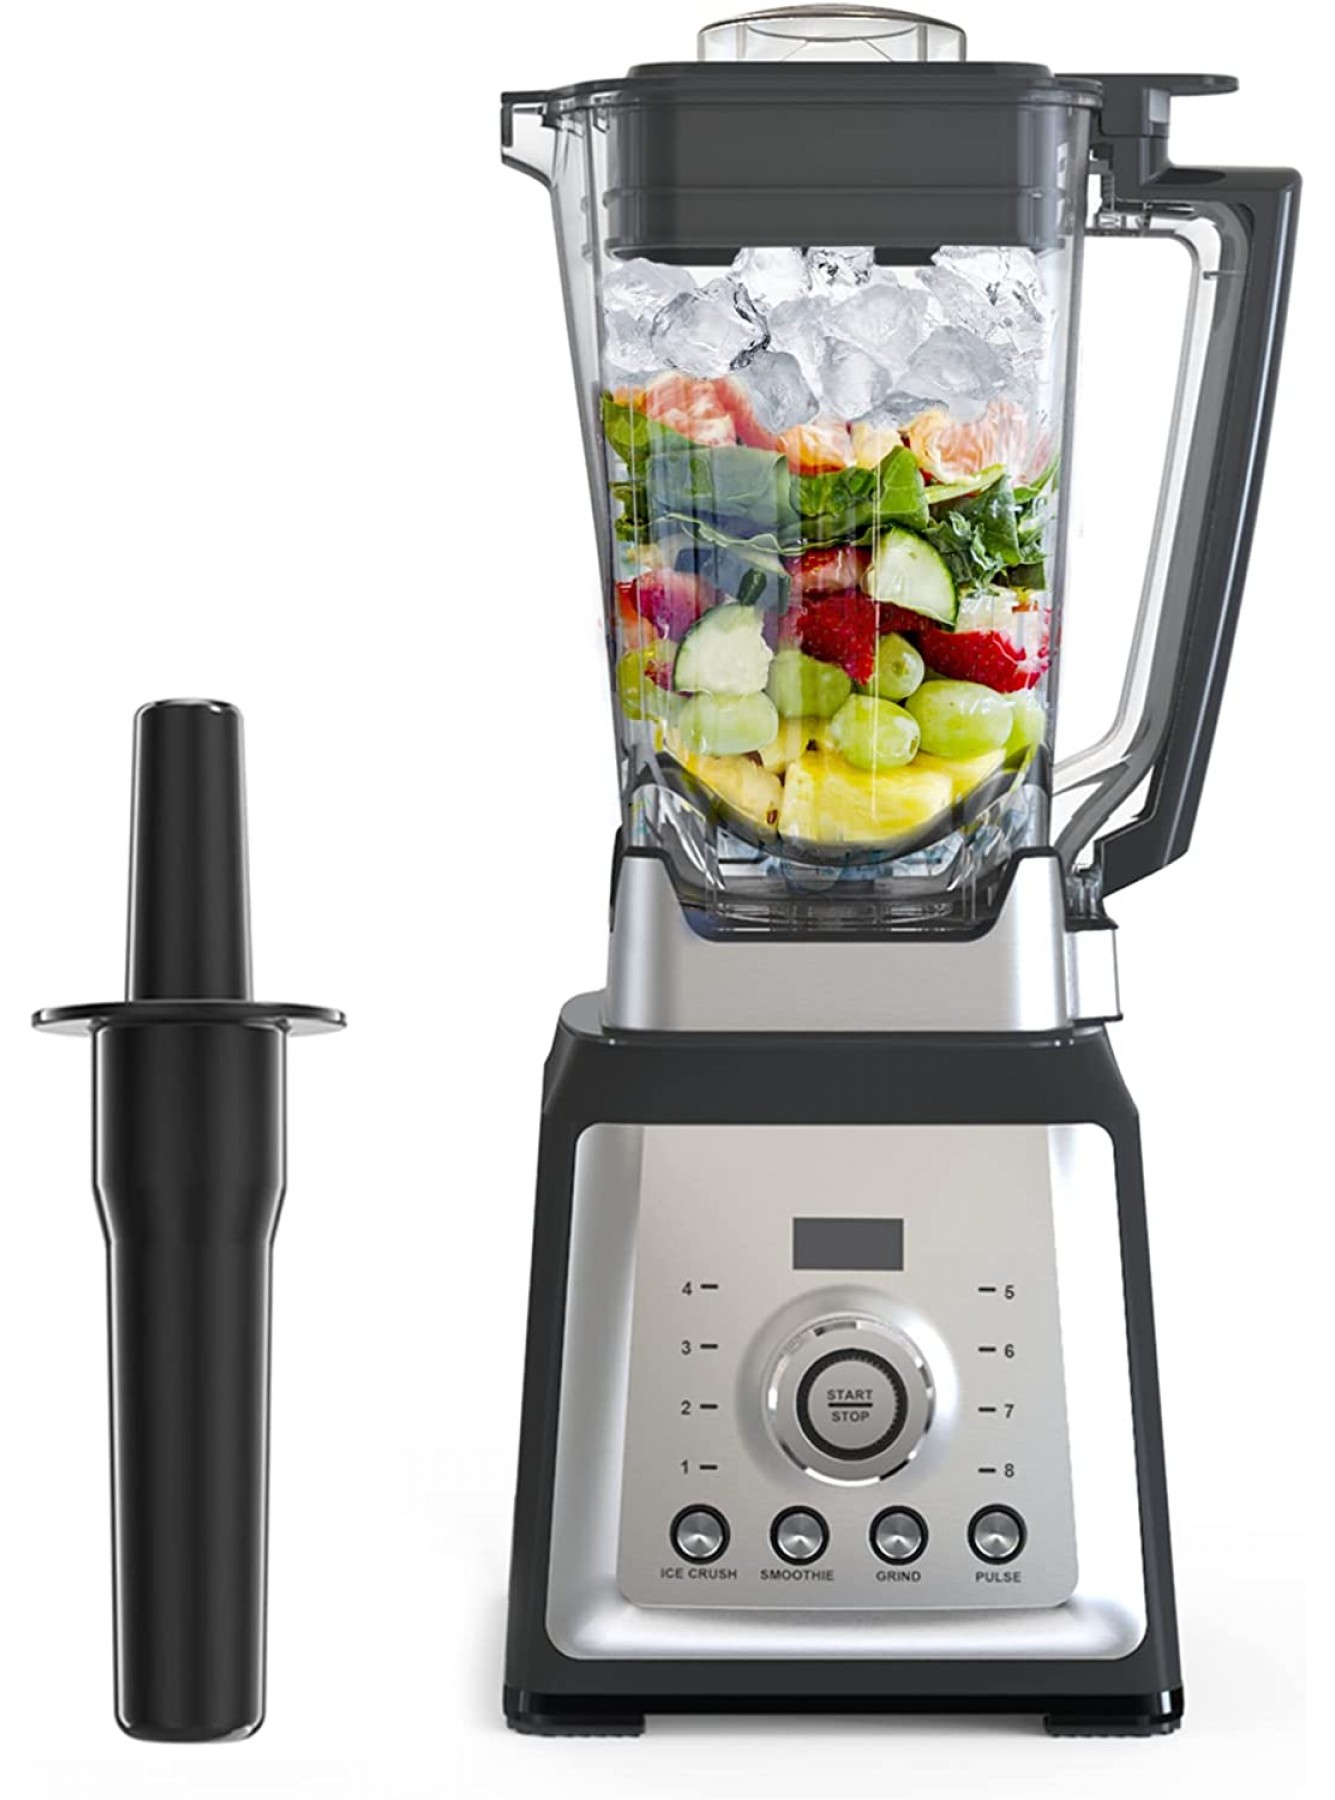 Buluna Professional Blender Countertop Blender with 8 Adjustable Speeds Large Capacity 70oz Tritan Pitcher 1450W Base and Precise Crushing Function for Crushed Ice Frozen Drinks and Smoothies B09N357WD8